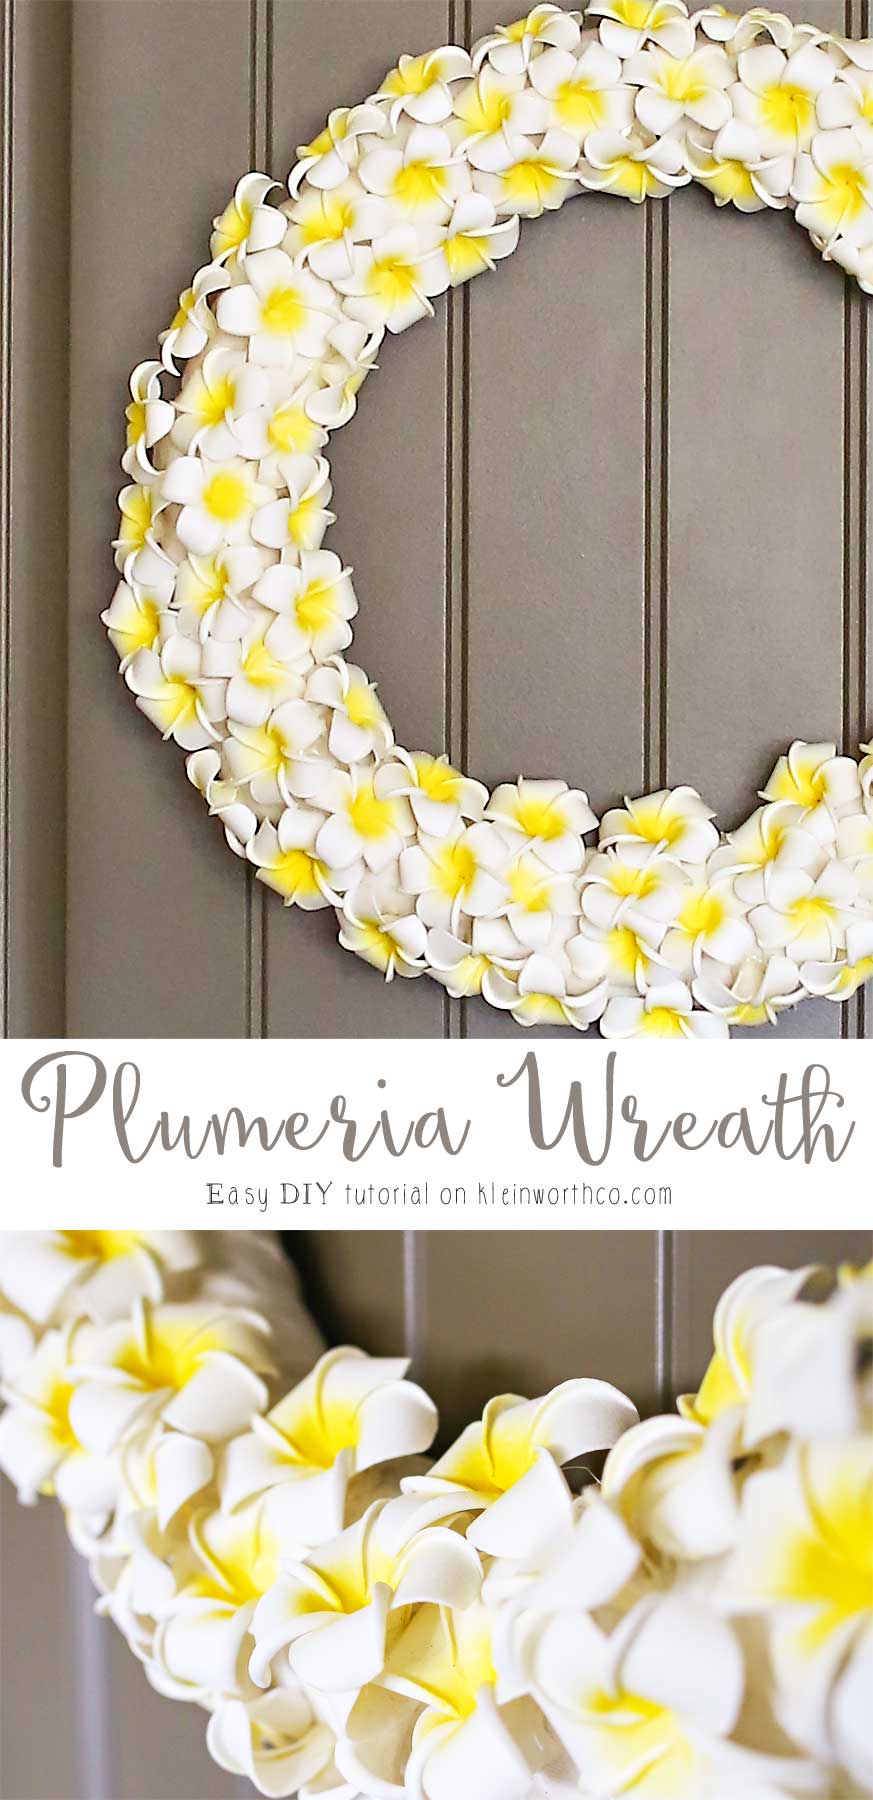 This Plumeria Wreath is the perfect summer front door decoration. Check out my full how-to tutorial on this simple & easy DIY project for the home.